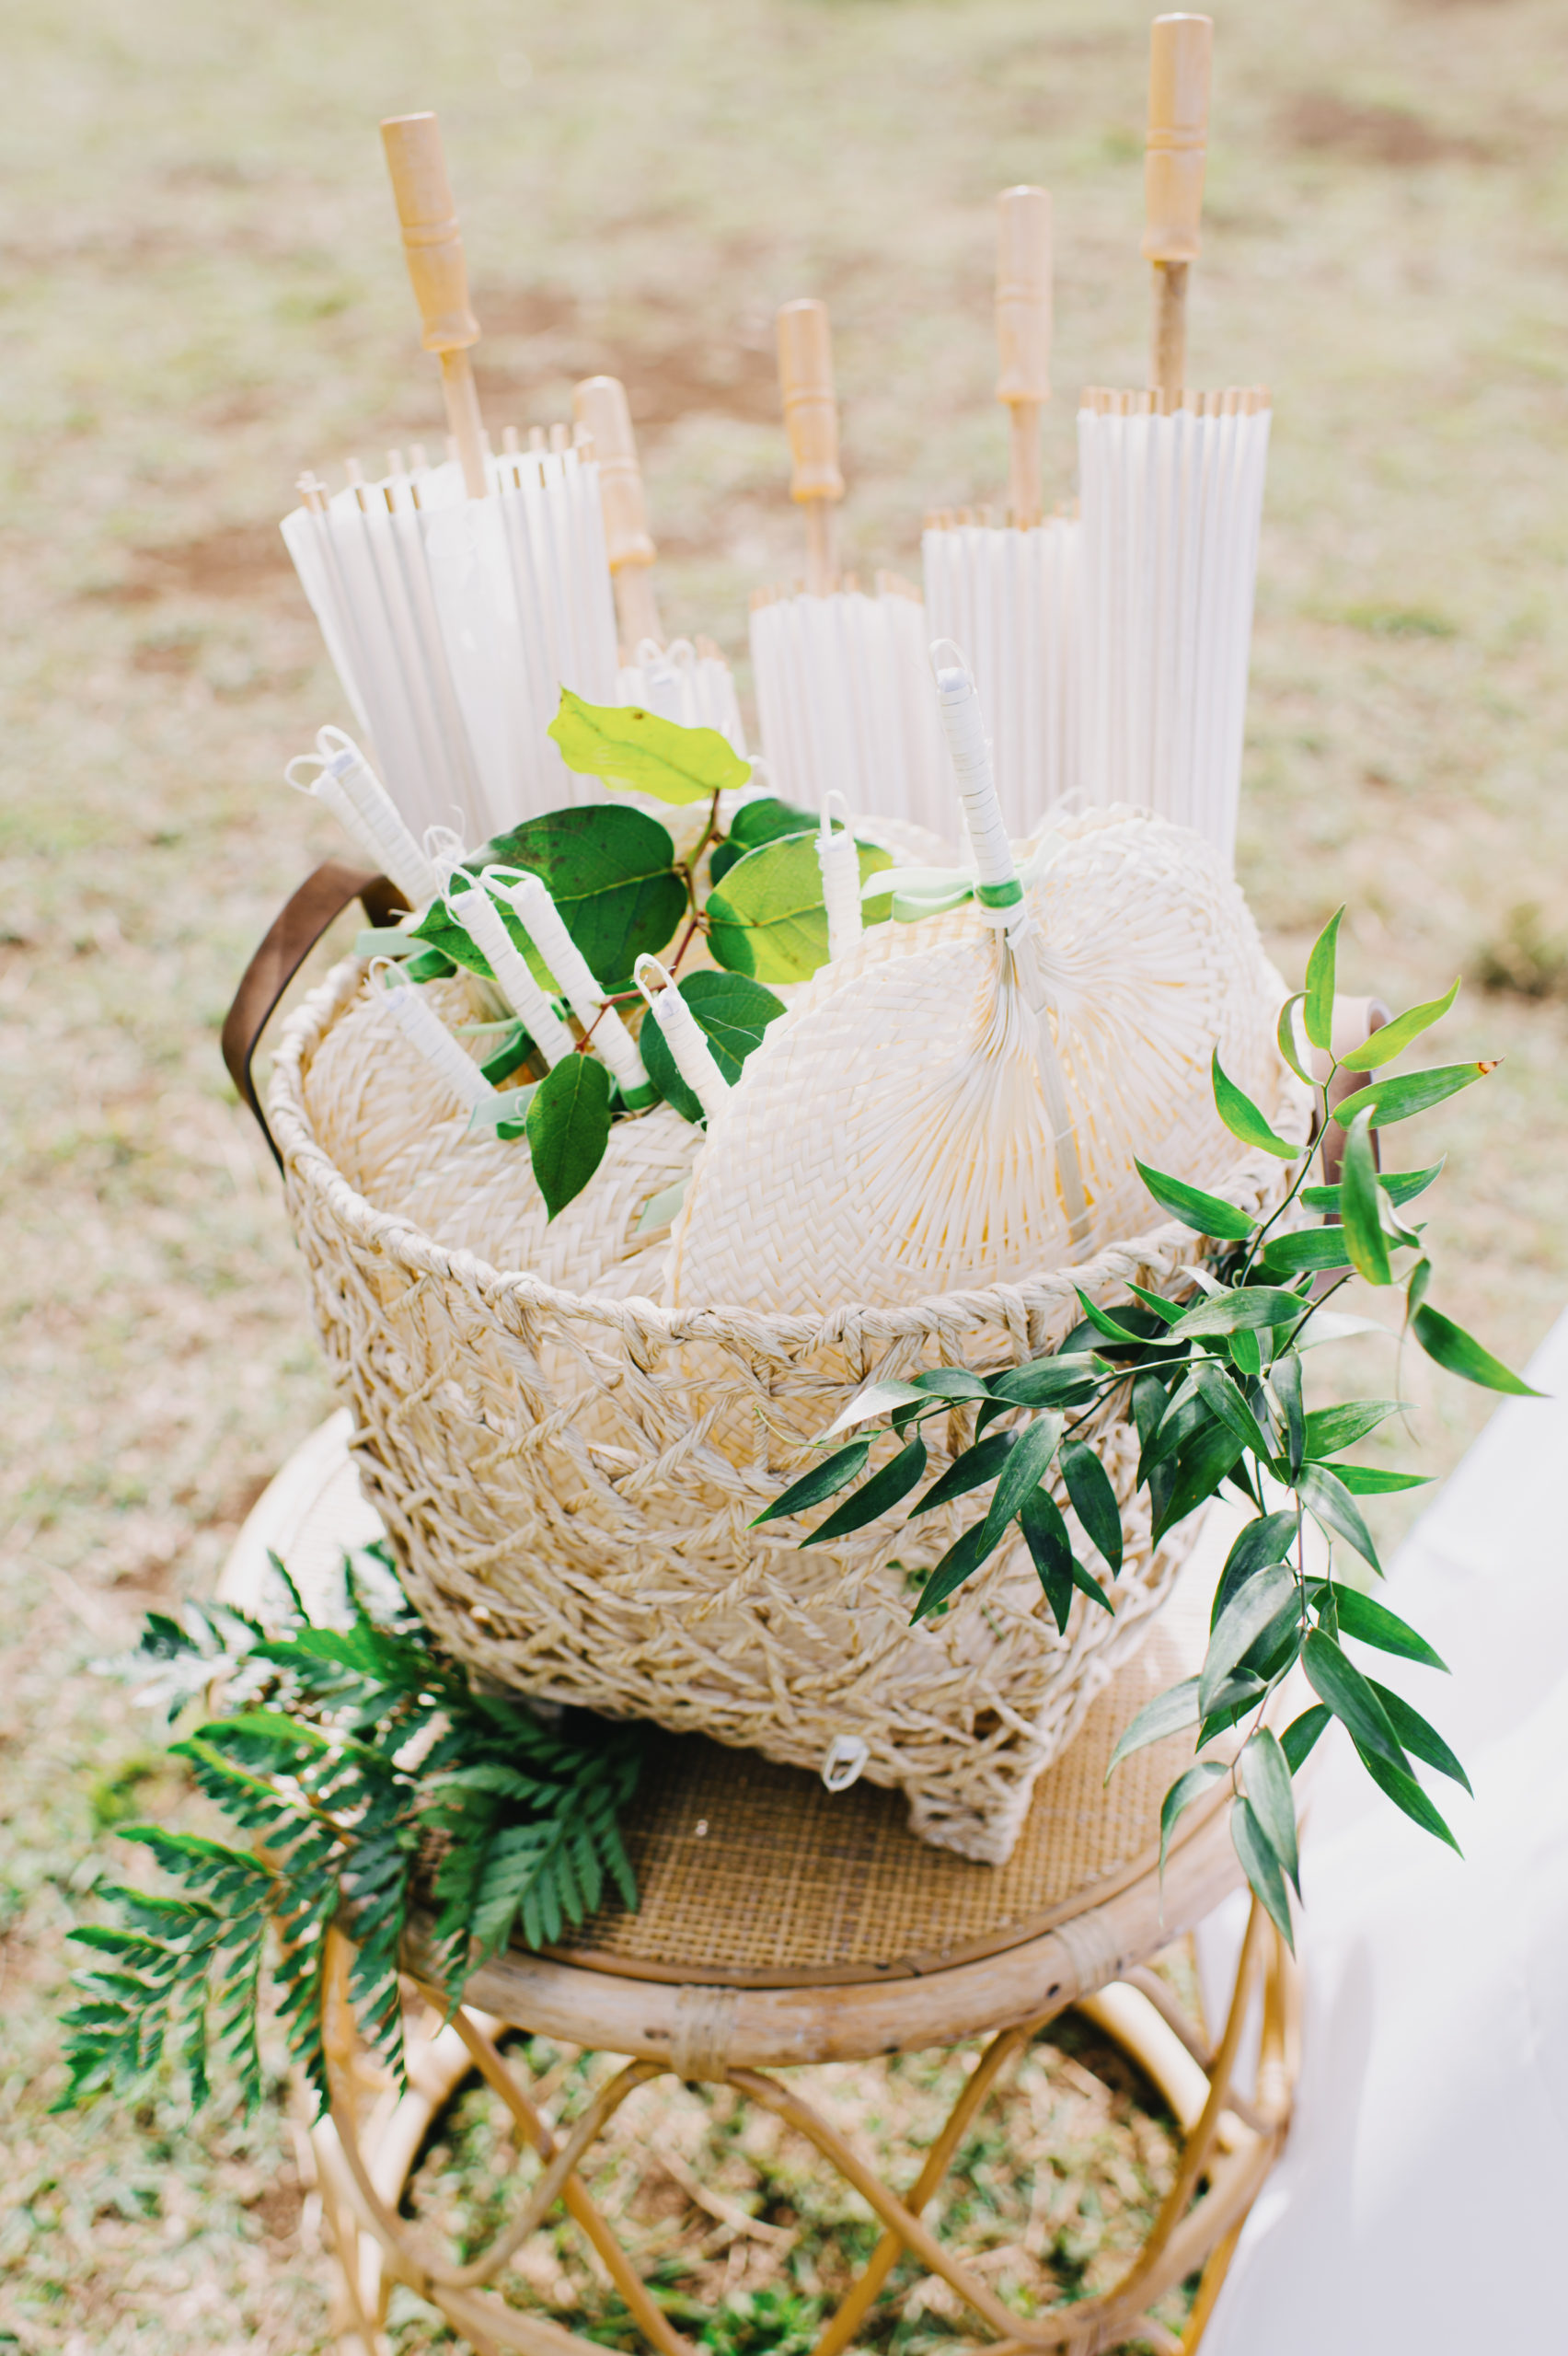 Stylish parasols and fans adding a touch of elegance to the tropical wedding atmosphere L Hewitt Photography